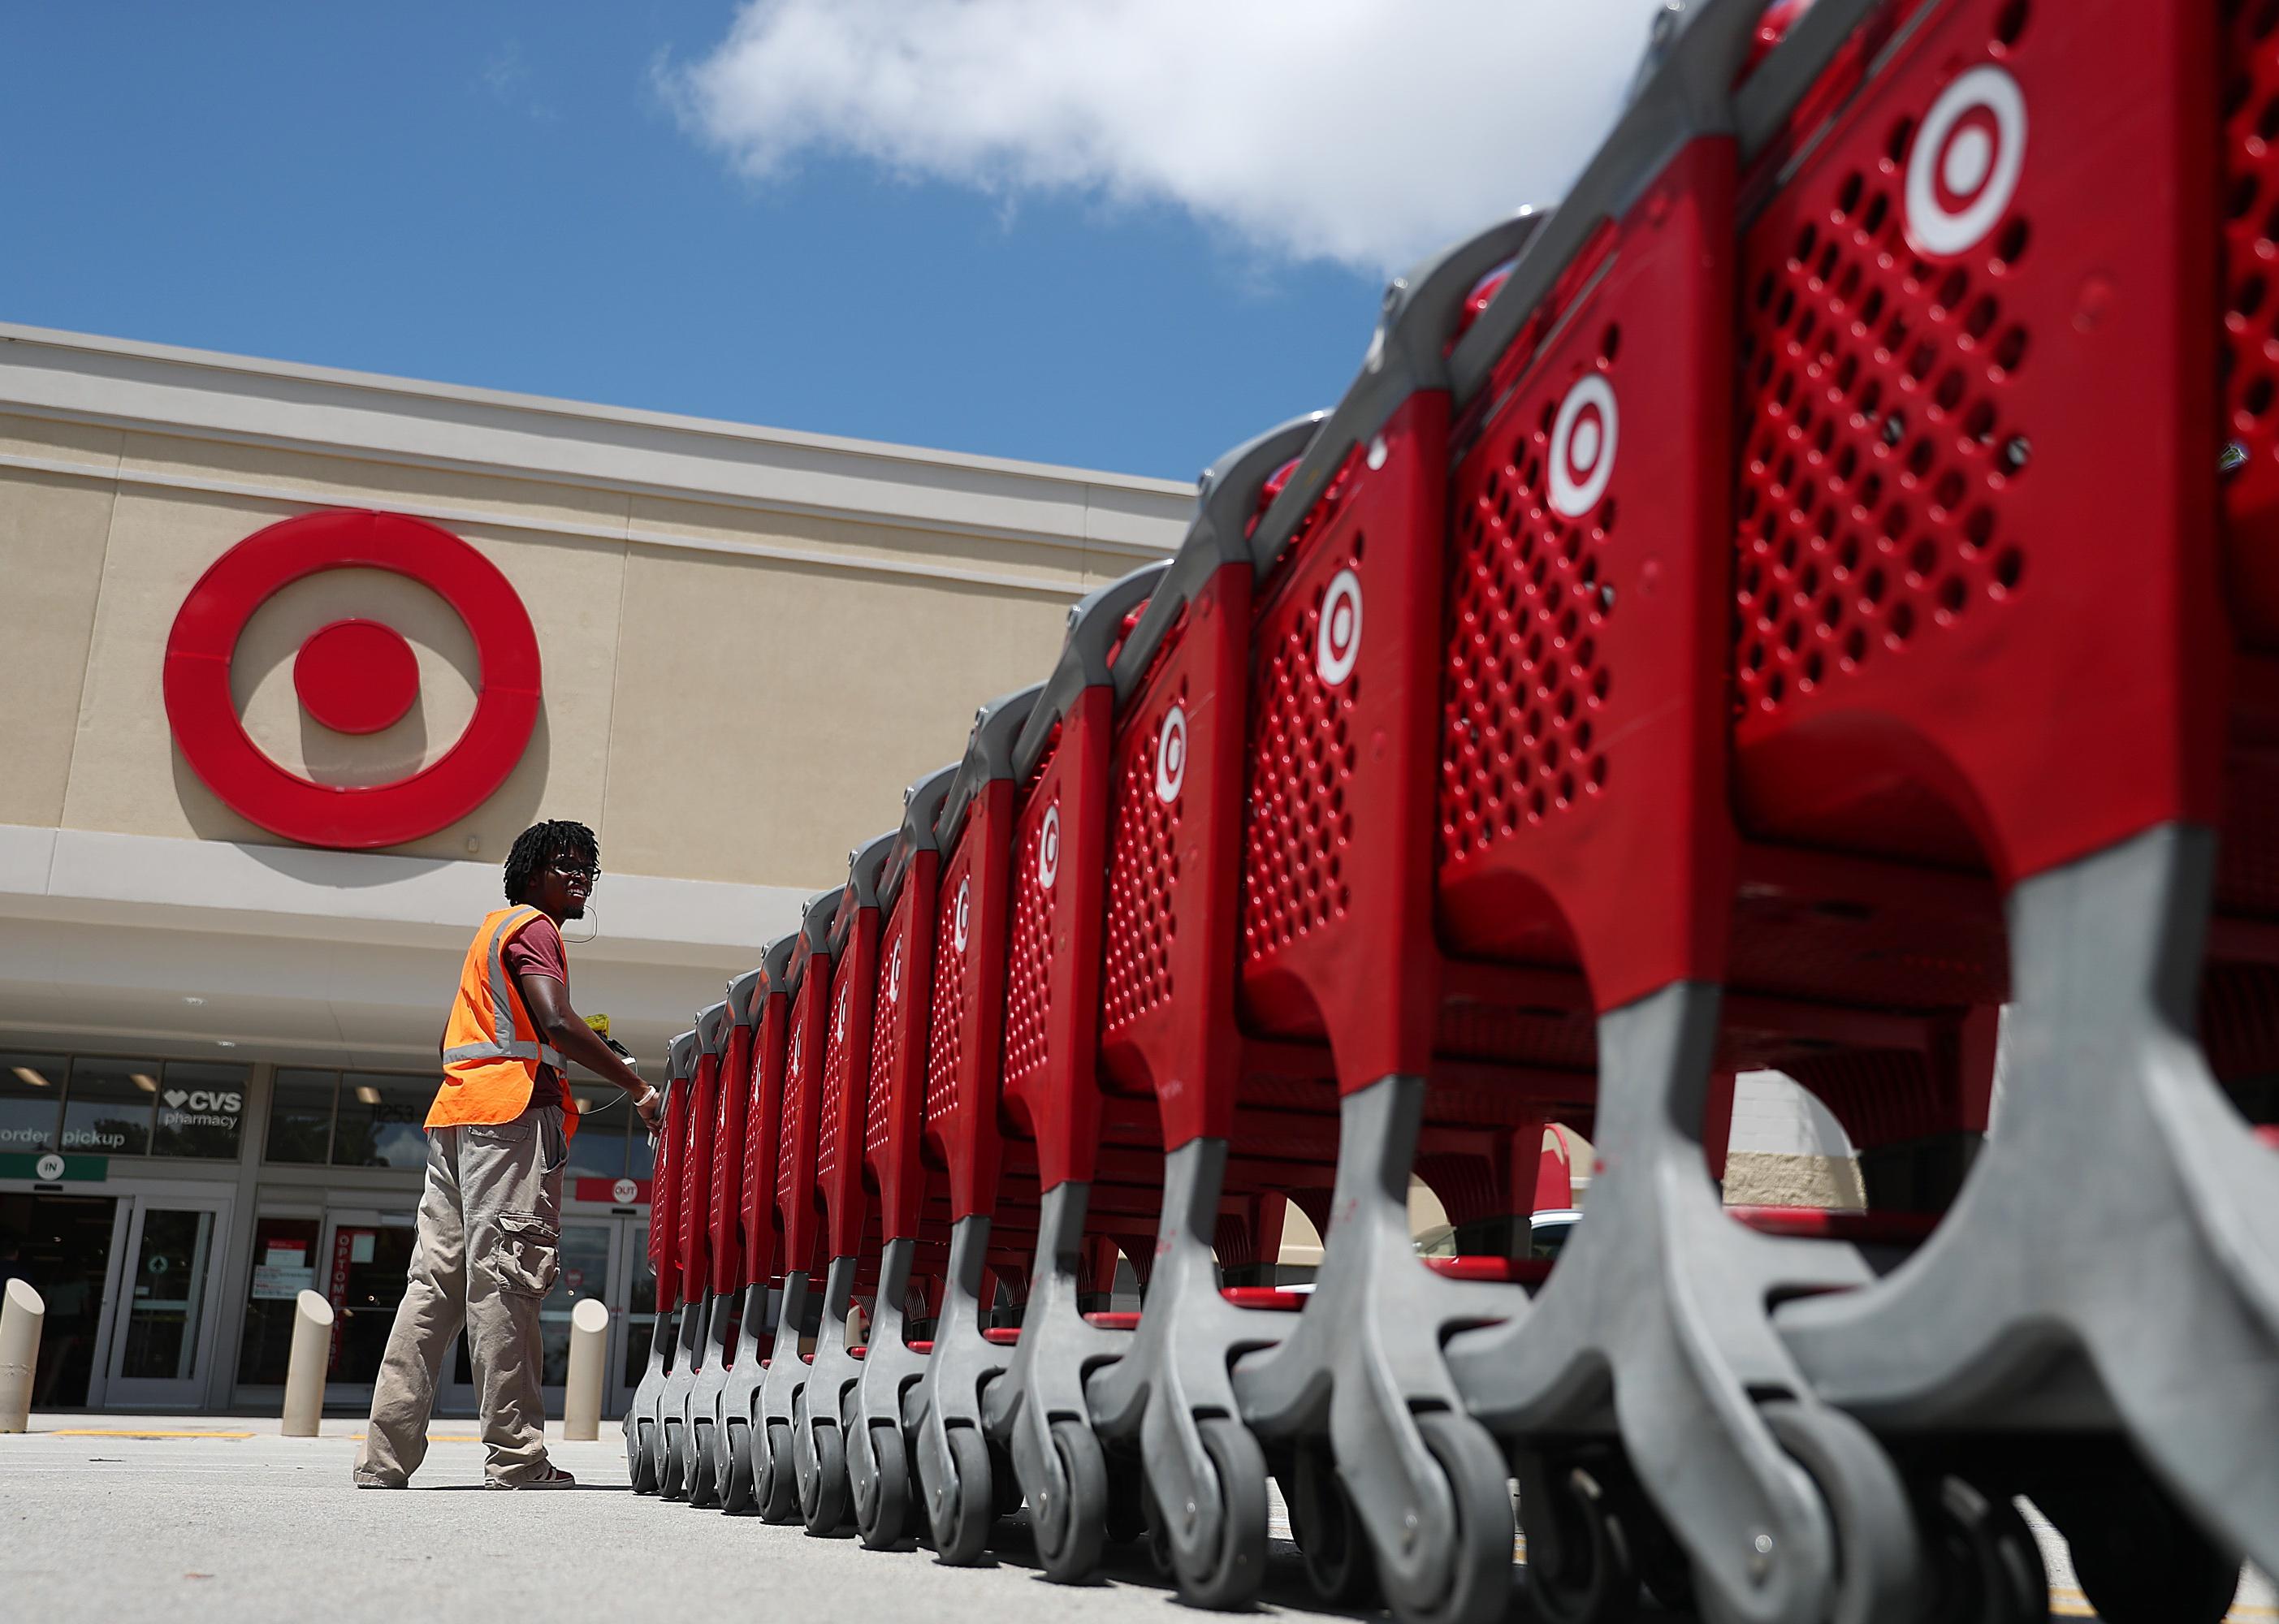 A Target store employee collects shopping carts